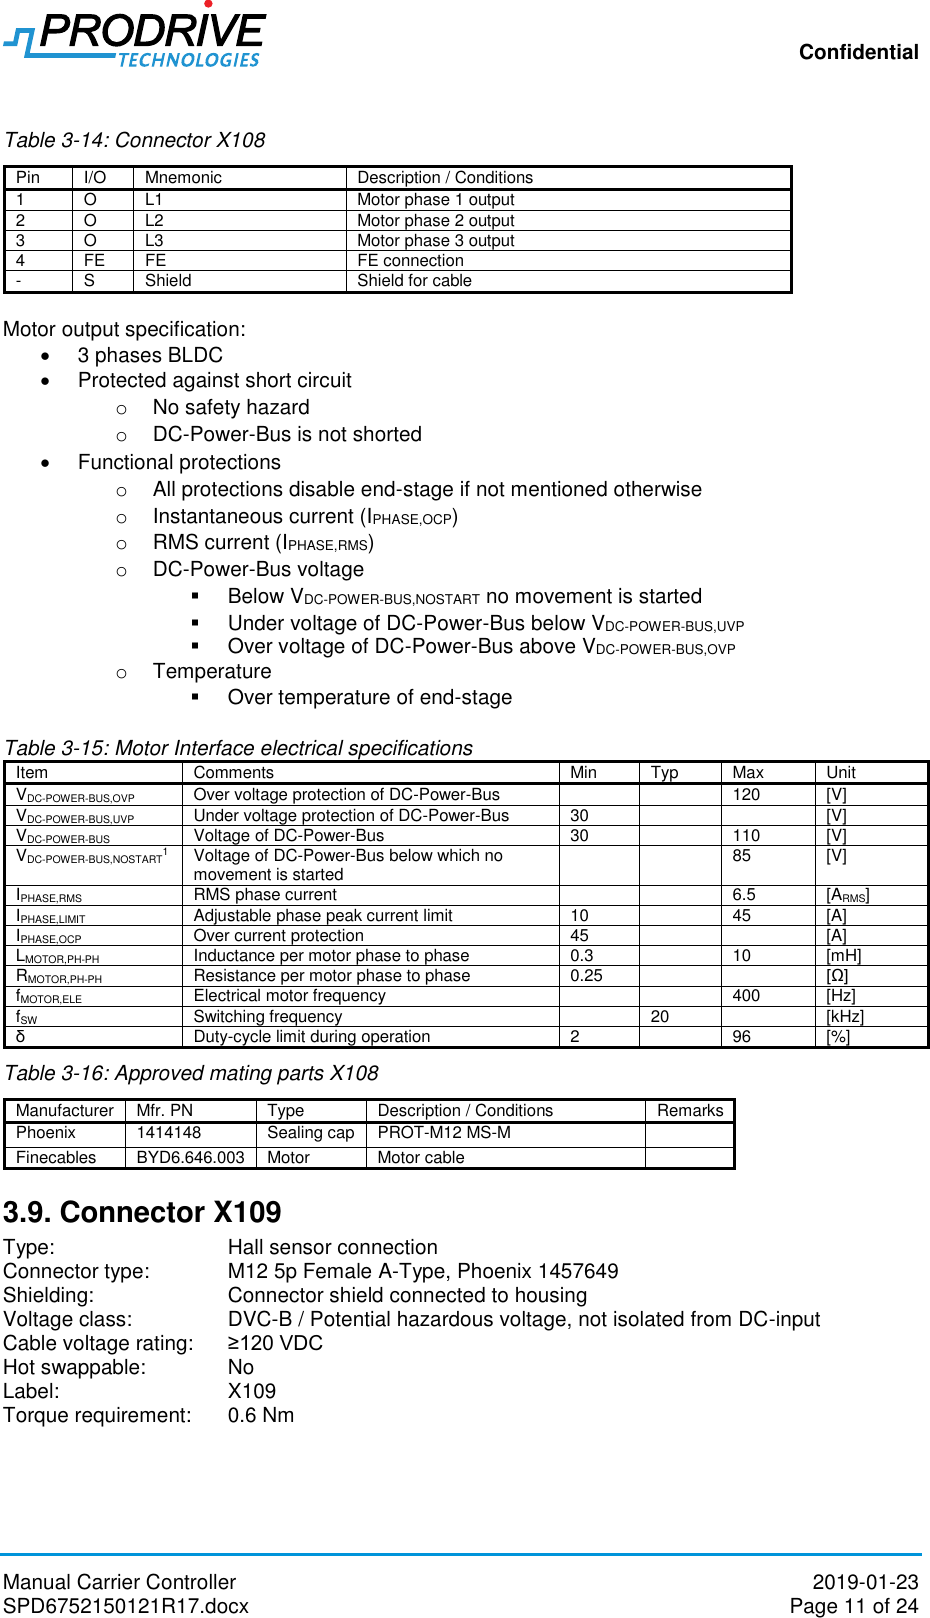 Confidential Manual Carrier Controller  2019-01-23 SPD6752150121R17.docx  Page 11 of 24  Table 3-14: Connector X108 Pin I/O Mnemonic Description / Conditions 1 O L1 Motor phase 1 output 2 O L2 Motor phase 2 output 3 O L3 Motor phase 3 output 4 FE FE FE connection - S Shield Shield for cable  Motor output specification:   3 phases BLDC   Protected against short circuit o  No safety hazard o DC-Power-Bus is not shorted    Functional protections o  All protections disable end-stage if not mentioned otherwise o  Instantaneous current (IPHASE,OCP) o  RMS current (IPHASE,RMS) o DC-Power-Bus voltage    Below VDC-POWER-BUS,NOSTART no movement is started   Under voltage of DC-Power-Bus below VDC-POWER-BUS,UVP    Over voltage of DC-Power-Bus above VDC-POWER-BUS,OVP o  Temperature   Over temperature of end-stage  Table 3-15: Motor Interface electrical specifications Item Comments Min Typ Max Unit VDC-POWER-BUS,OVP  Over voltage protection of DC-Power-Bus    120 [V] VDC-POWER-BUS,UVP  Under voltage protection of DC-Power-Bus  30   [V] VDC-POWER-BUS Voltage of DC-Power-Bus  30  110 [V] VDC-POWER-BUS,NOSTART1  Voltage of DC-Power-Bus below which no movement is started   85 [V] IPHASE,RMS RMS phase current   6.5 [ARMS] IPHASE,LIMIT Adjustable phase peak current limit 10  45 [A] IPHASE,OCP Over current protection 45   [A] LMOTOR,PH-PH Inductance per motor phase to phase 0.3  10 [mH] RMOTOR,PH-PH Resistance per motor phase to phase 0.25   [Ω] fMOTOR,ELE Electrical motor frequency   400 [Hz] fSW Switching frequency  20  [kHz] δ Duty-cycle limit during operation 2  96 [%] Table 3-16: Approved mating parts X108 Manufacturer Mfr. PN Type Description / Conditions Remarks Phoenix 1414148 Sealing cap PROT-M12 MS-M  Finecables  BYD6.646.003 Motor Motor cable  3.9. Connector X109 Type:       Hall sensor connection Connector type:   M12 5p Female A-Type, Phoenix 1457649 Shielding:    Connector shield connected to housing Voltage class:    DVC-B / Potential hazardous voltage, not isolated from DC-input Cable voltage rating:   ≥120 VDC Hot swappable:   No Label:       X109 Torque requirement:  0.6 Nm  